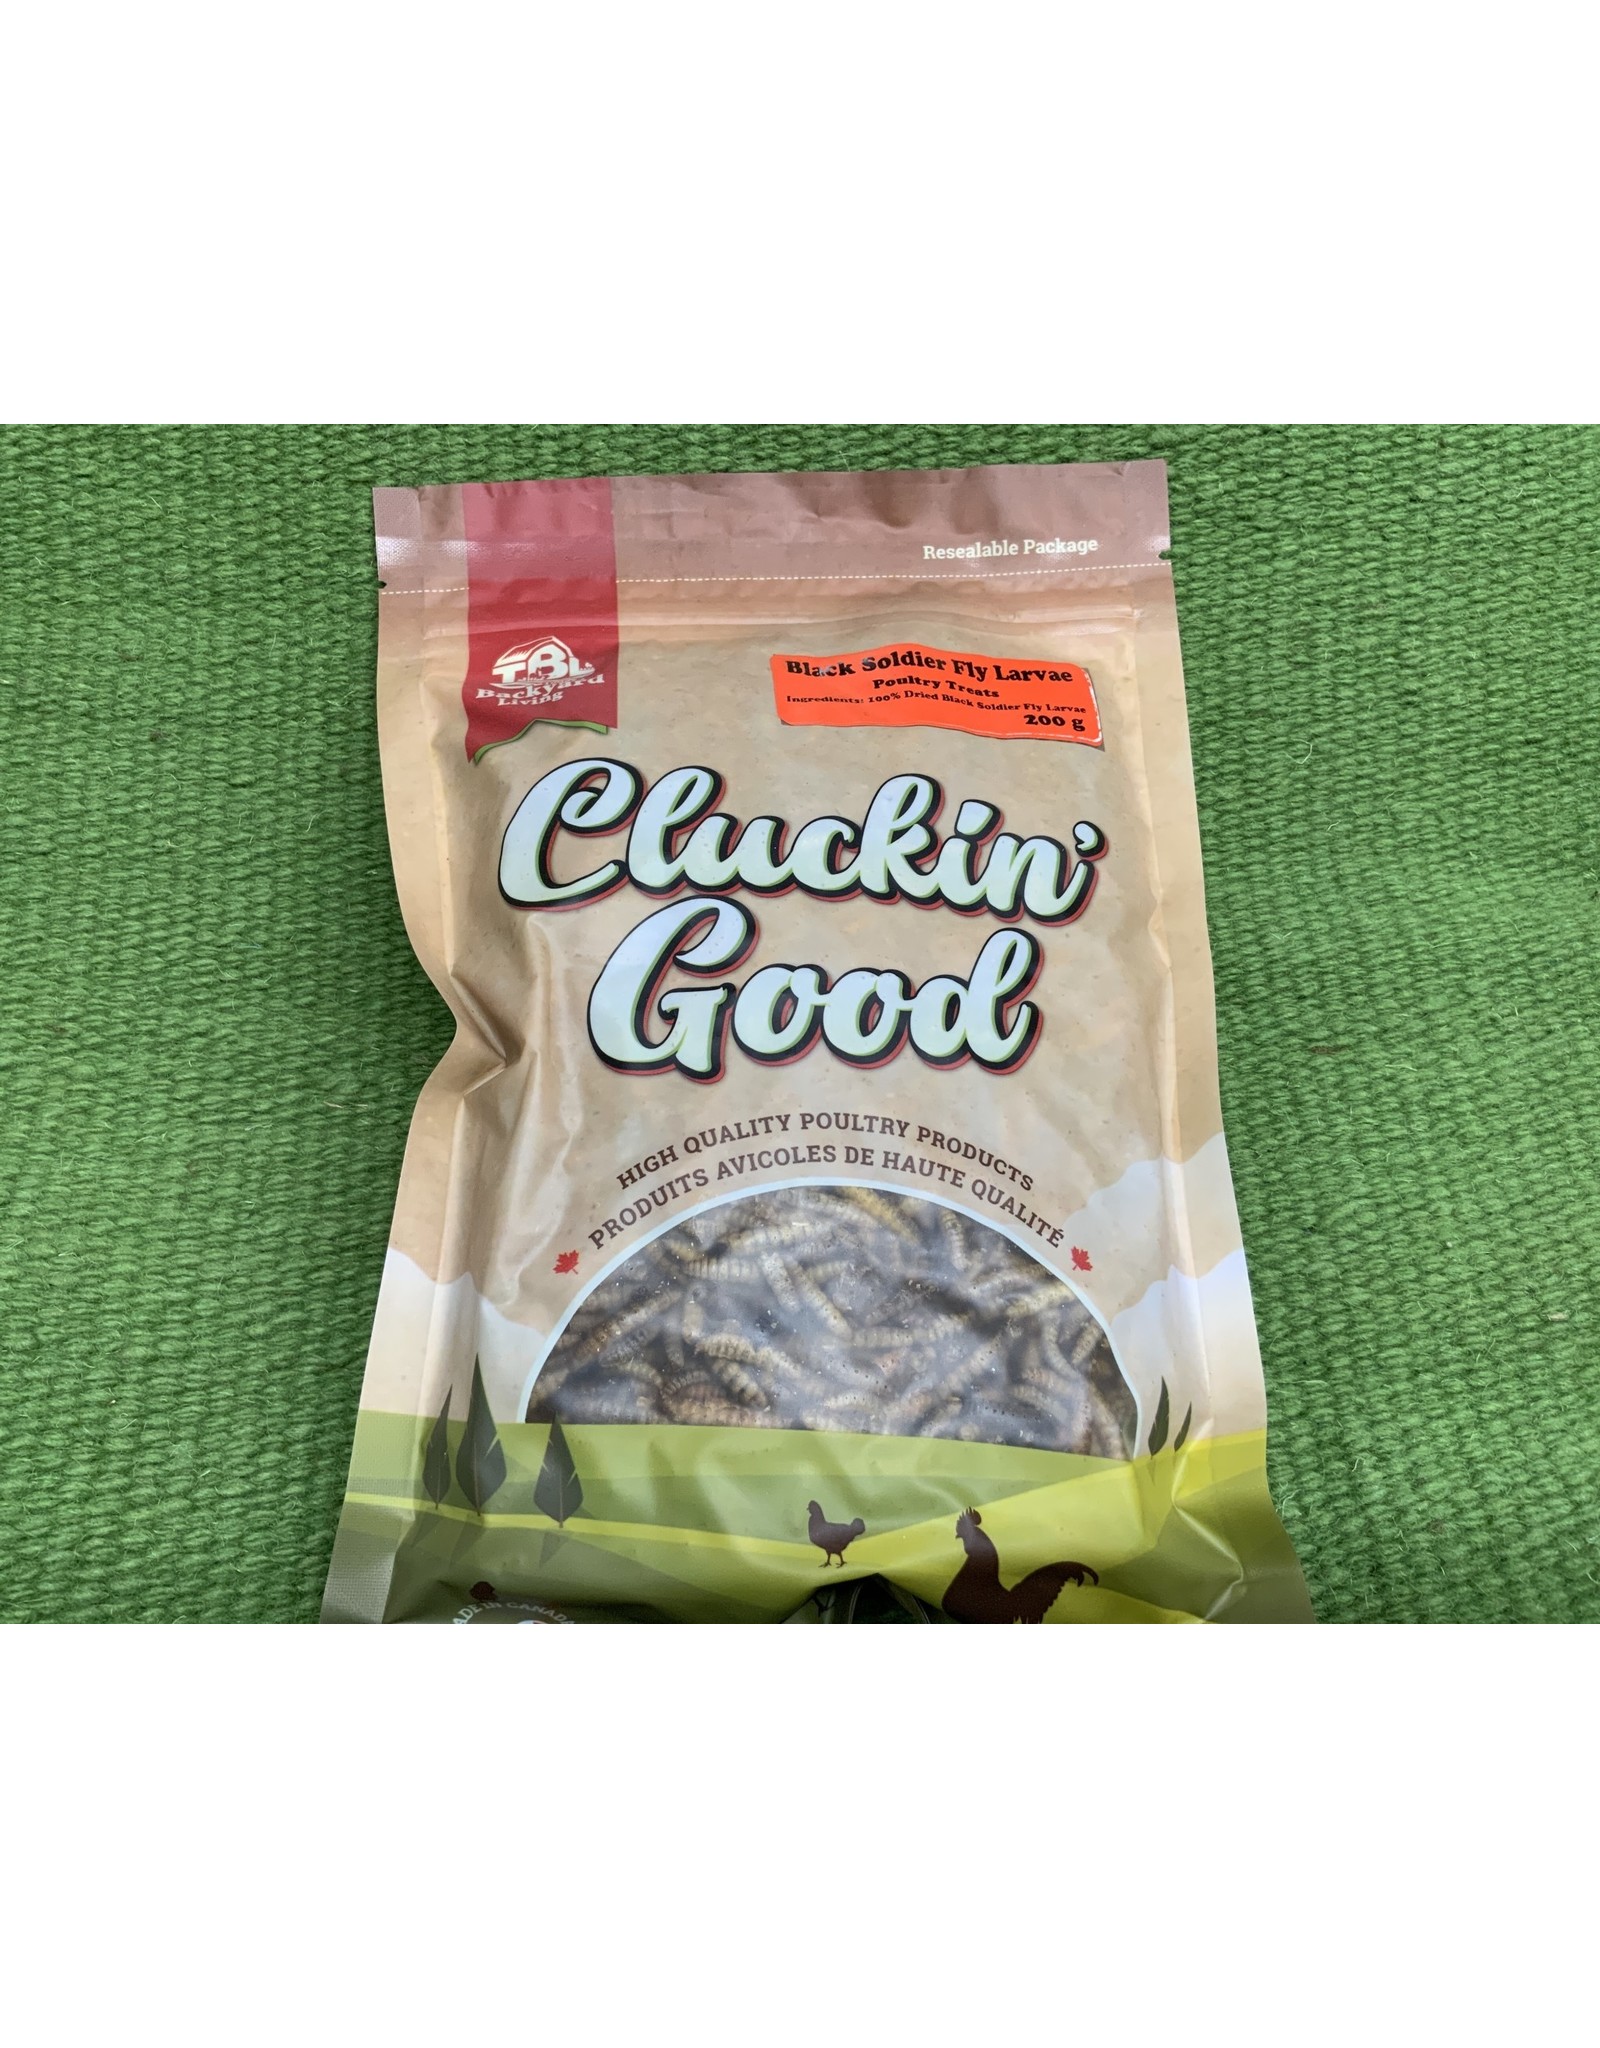 Cluckin Good  Black Soldier Fly Larvae Poultry Treats 200g  12 bags / per box - TBLCGBFL001